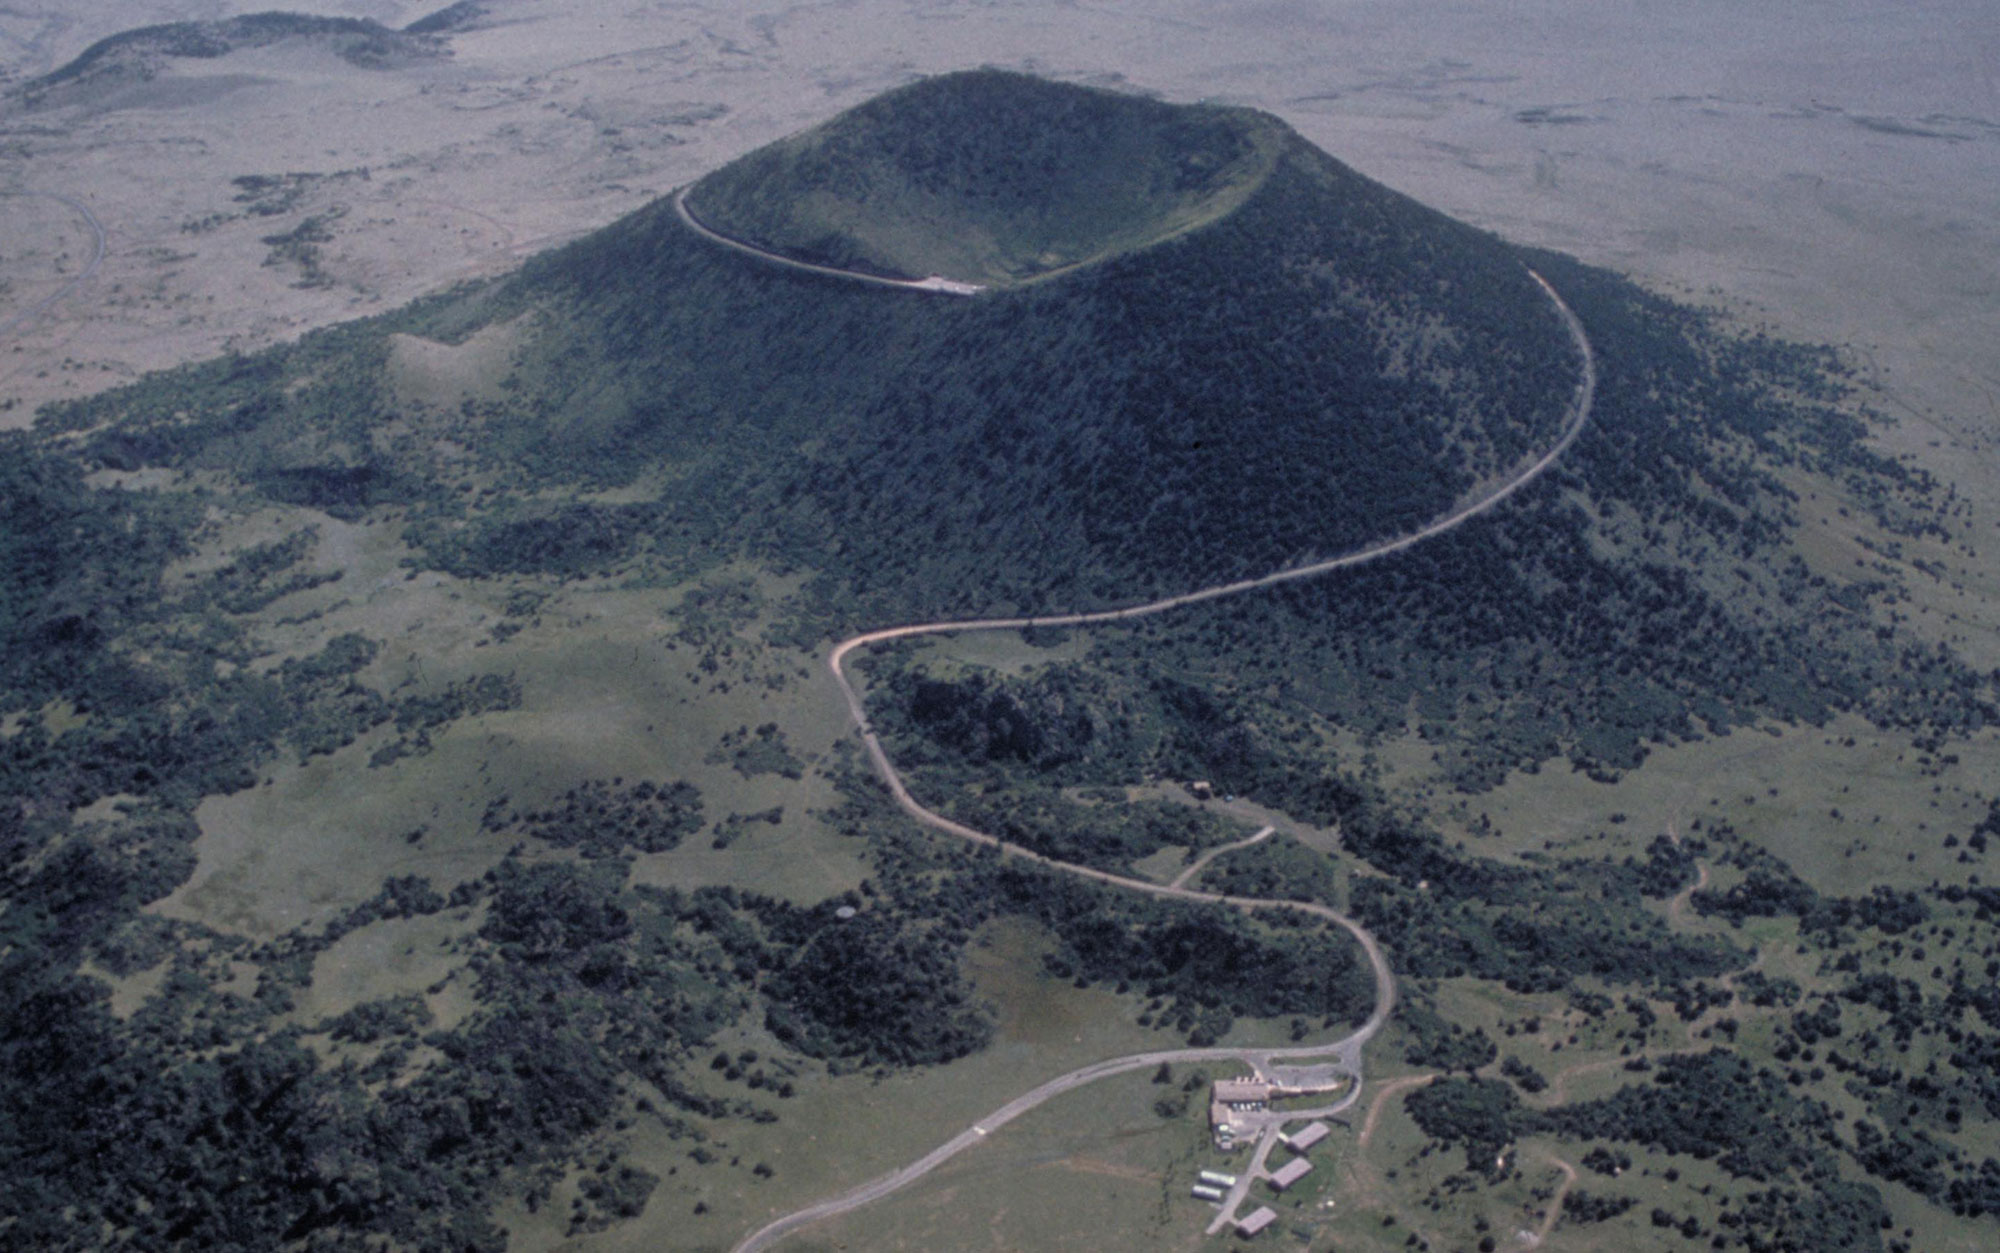 Photograph of Capulin Volcano in northern New Mexico. This volcano is an ancient caldera. It is a cone-shaped hill rising from a flat landscape. The top of the hill has a large depression in it. Building and a parking area can be seen at the base of the hill (bottom or the image). A road spirals up the hill to the top.